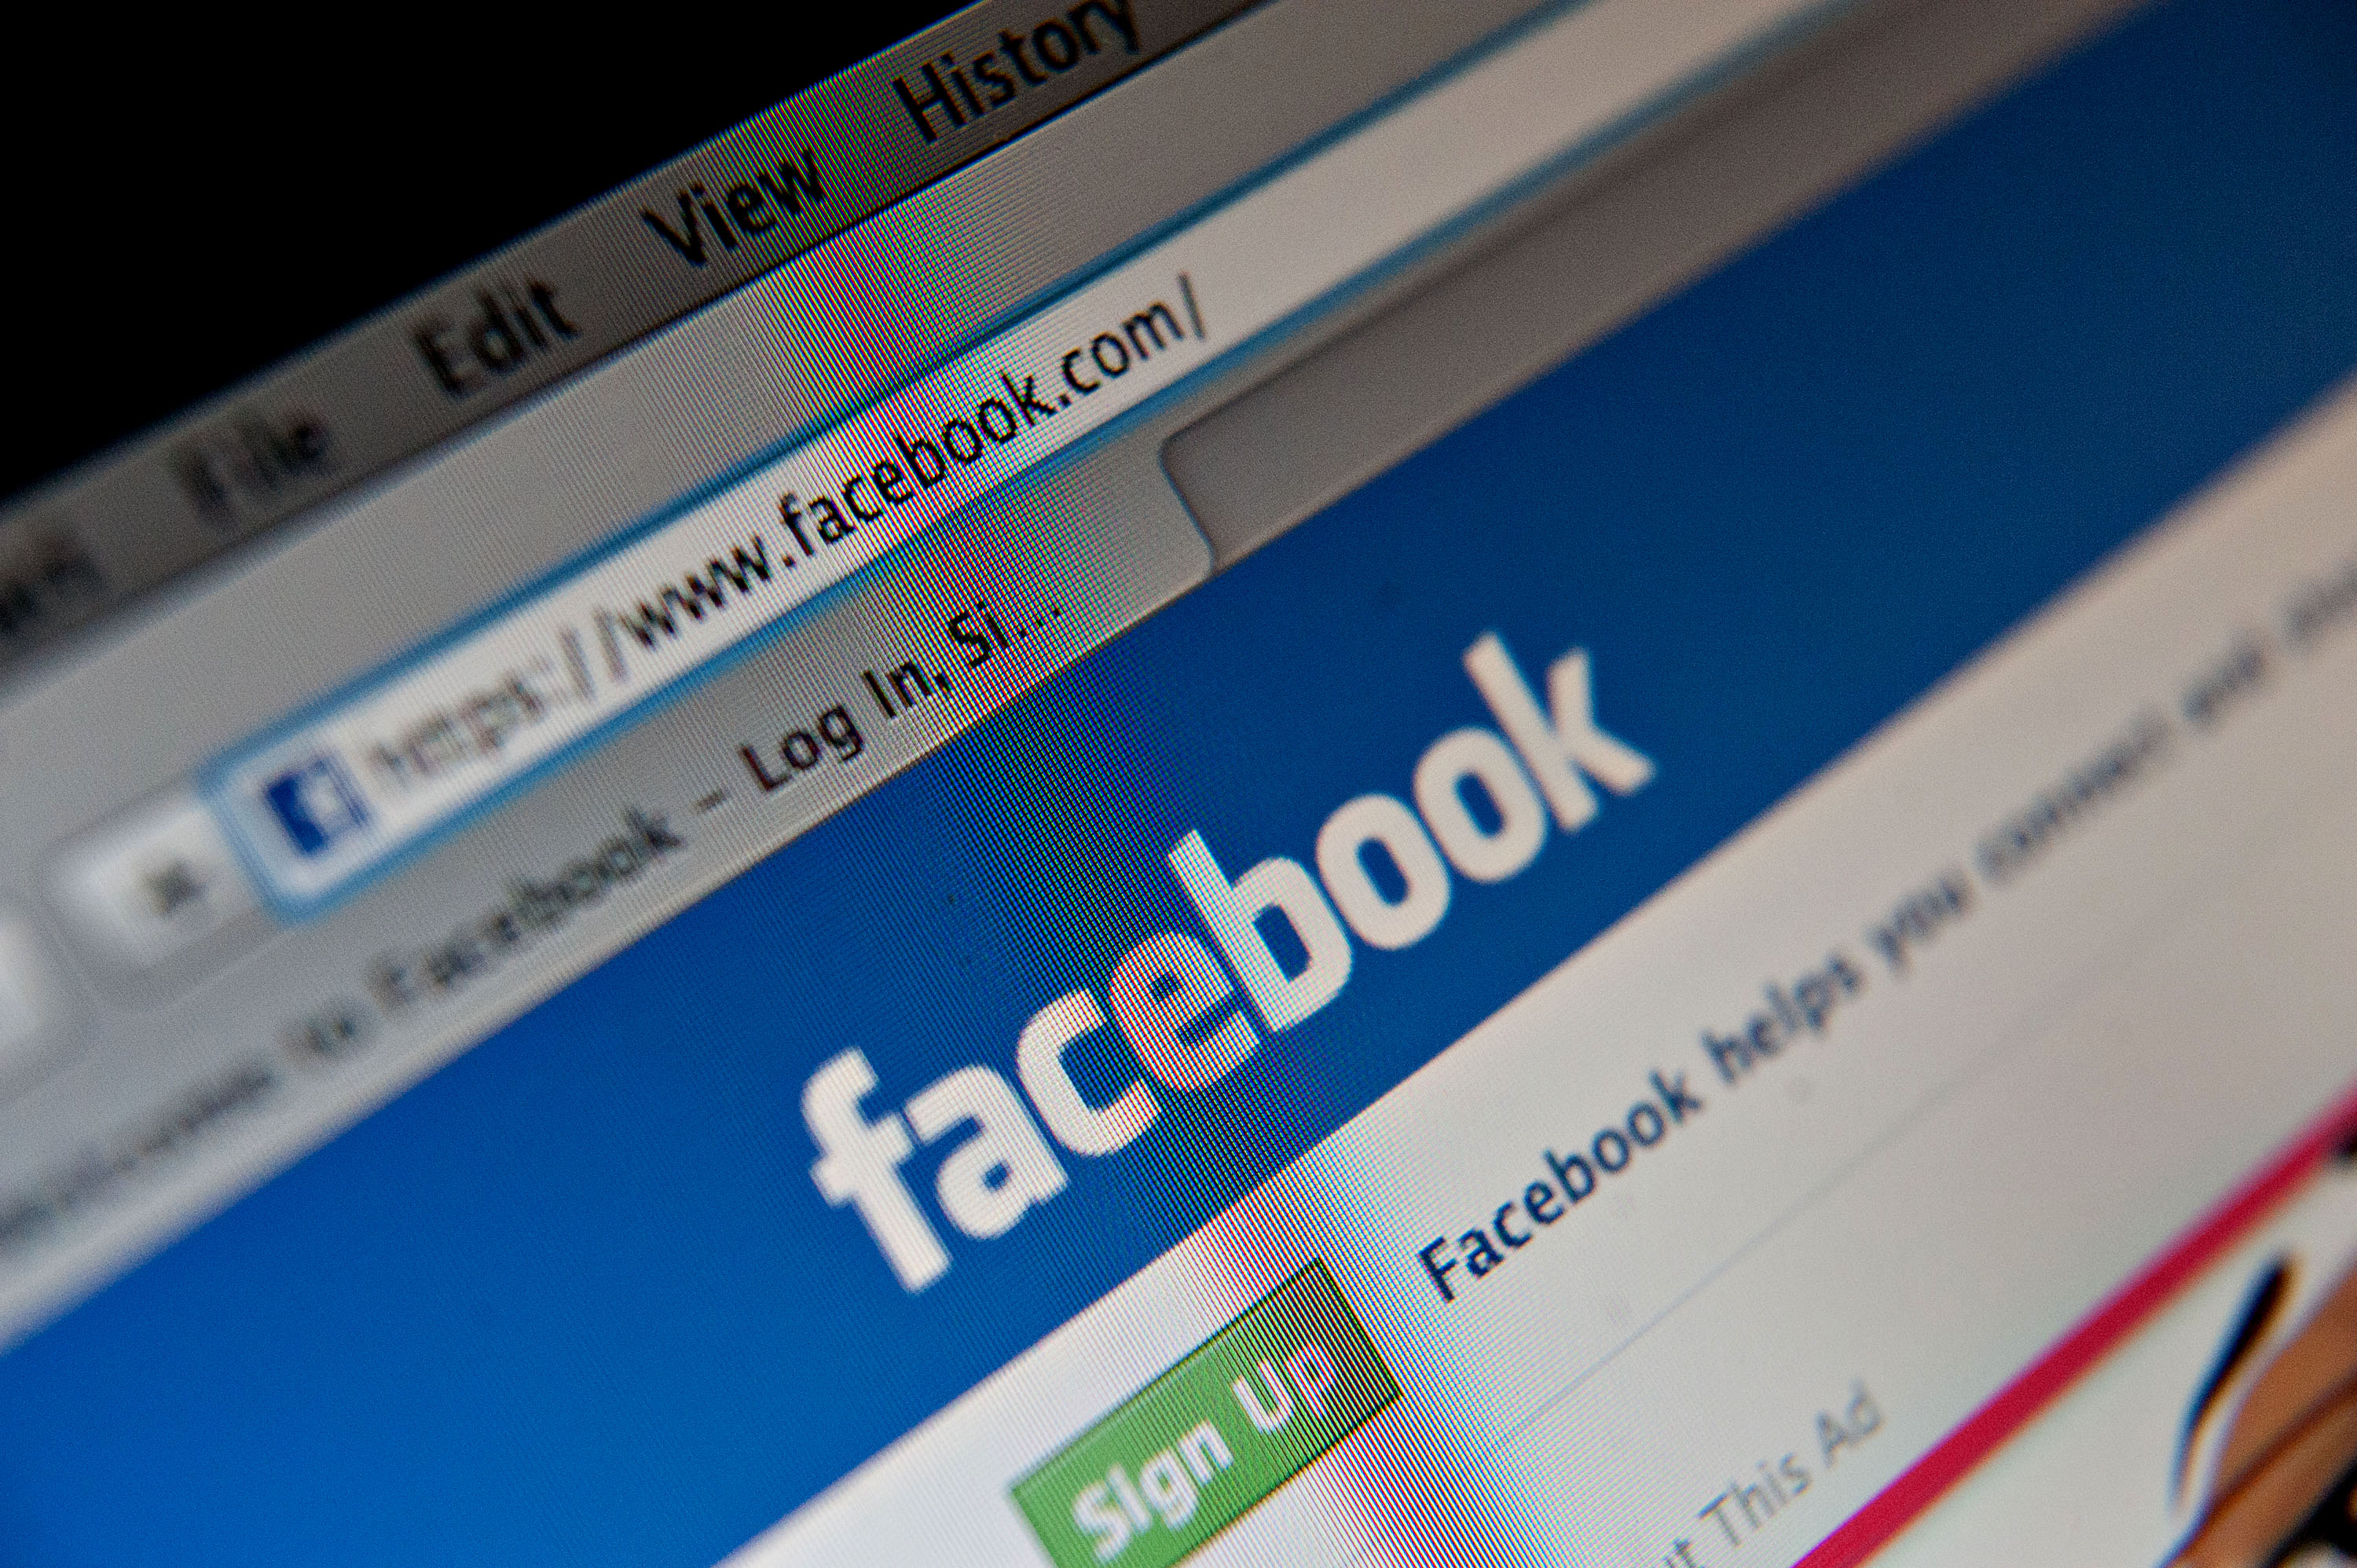 The top of the login page for Facebook.com. (Bloomberg—Bloomberg via Getty Images)